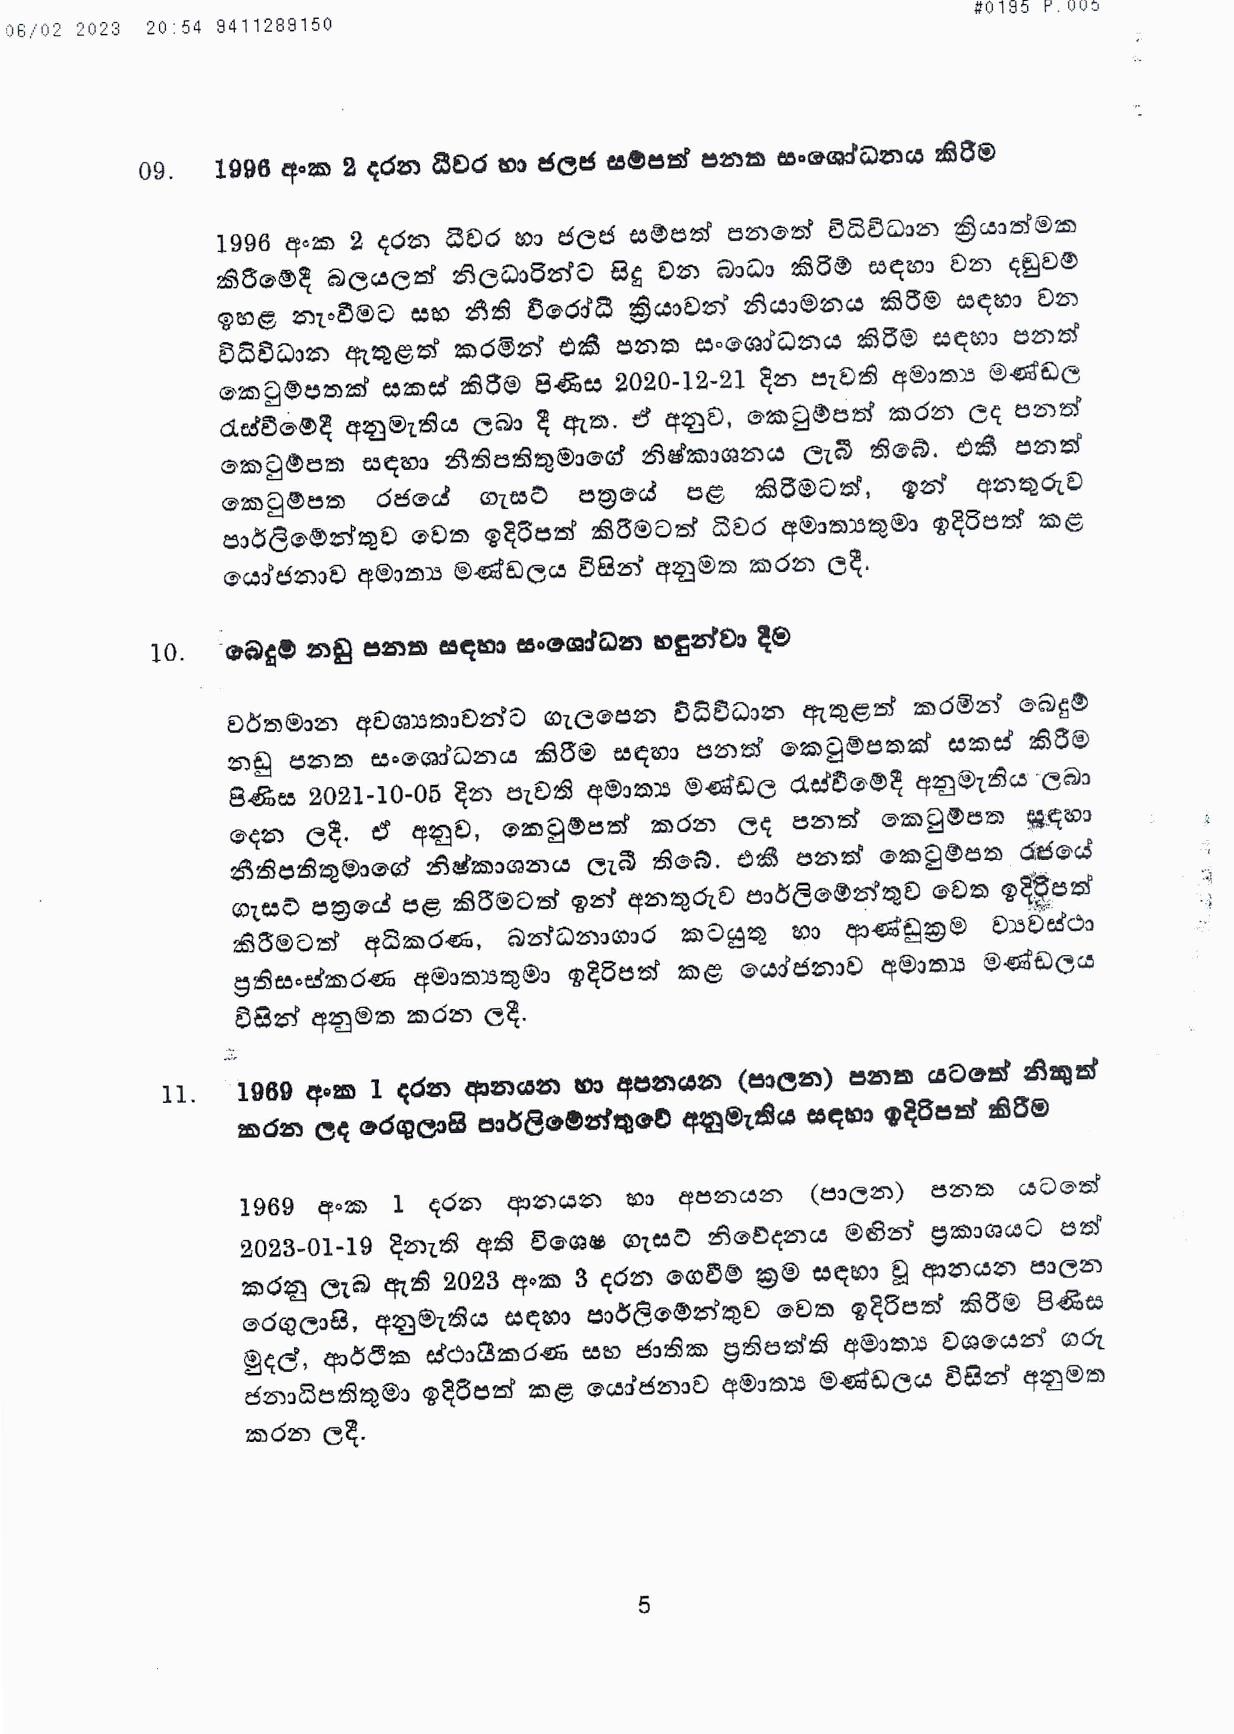 Cabinet Decision on 06.02.2023 page 005